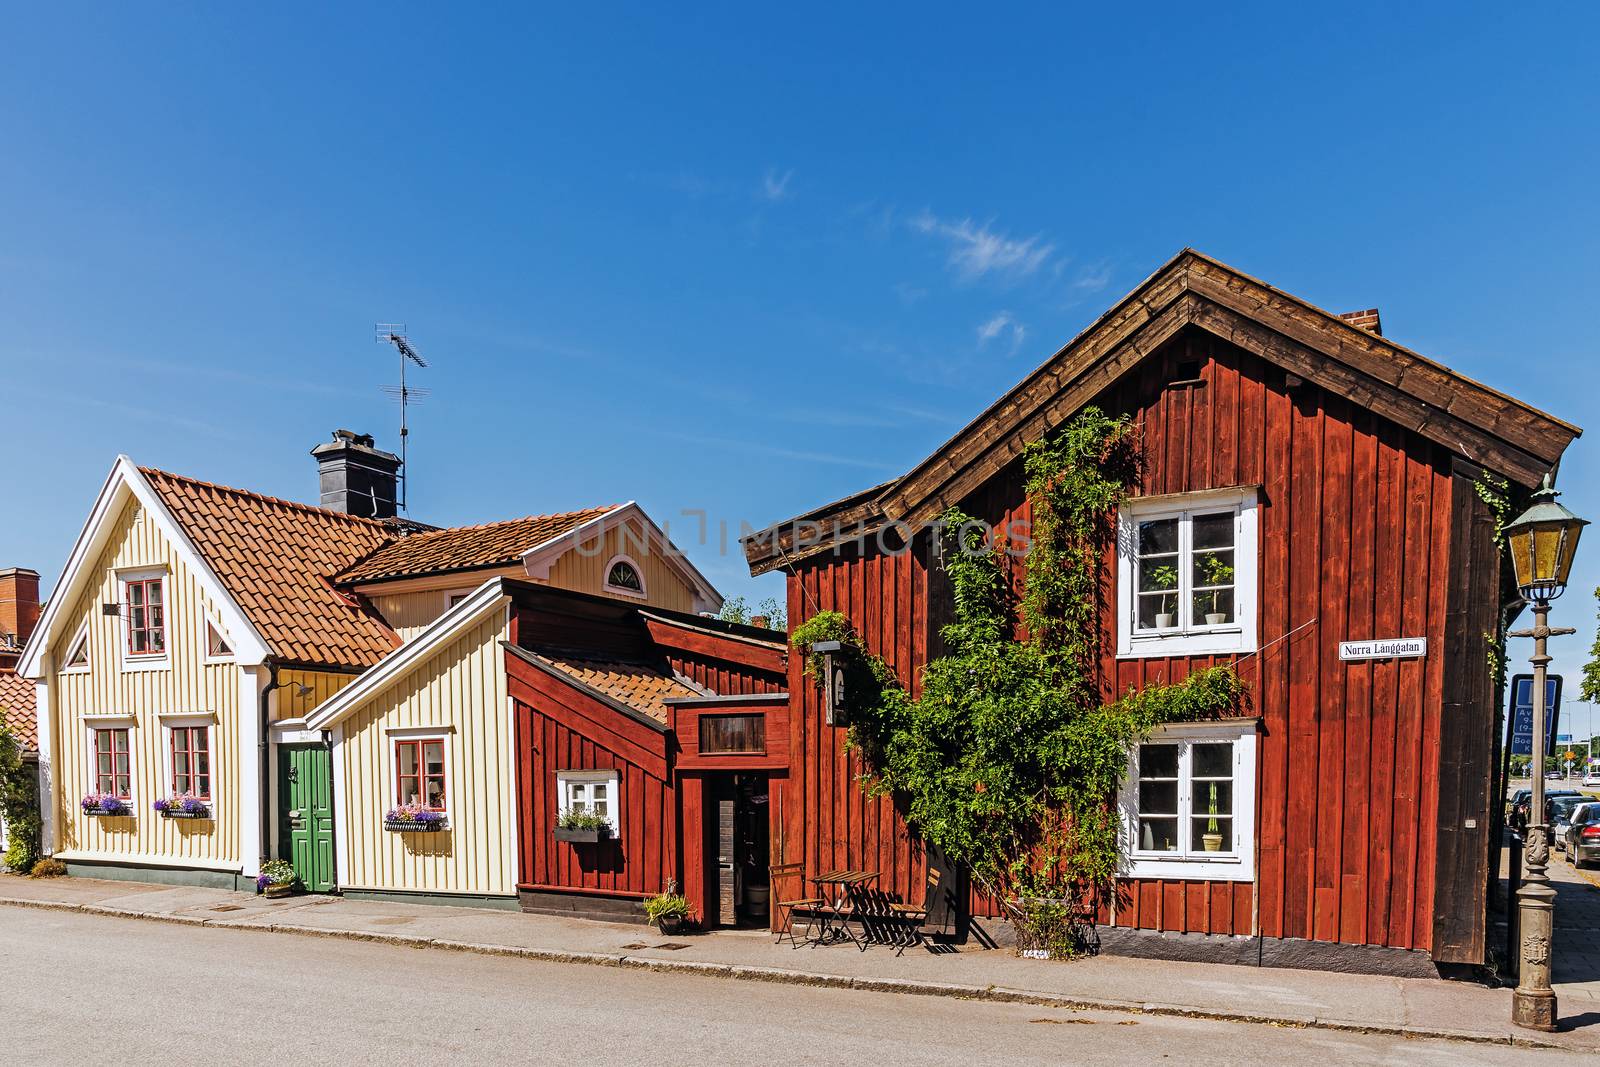 Small residential houses in Kalmar, city situated by the Baltic Sea with around 36k inhabitants, the seat of Kalmar Municipality and the capital of Kalmar County.